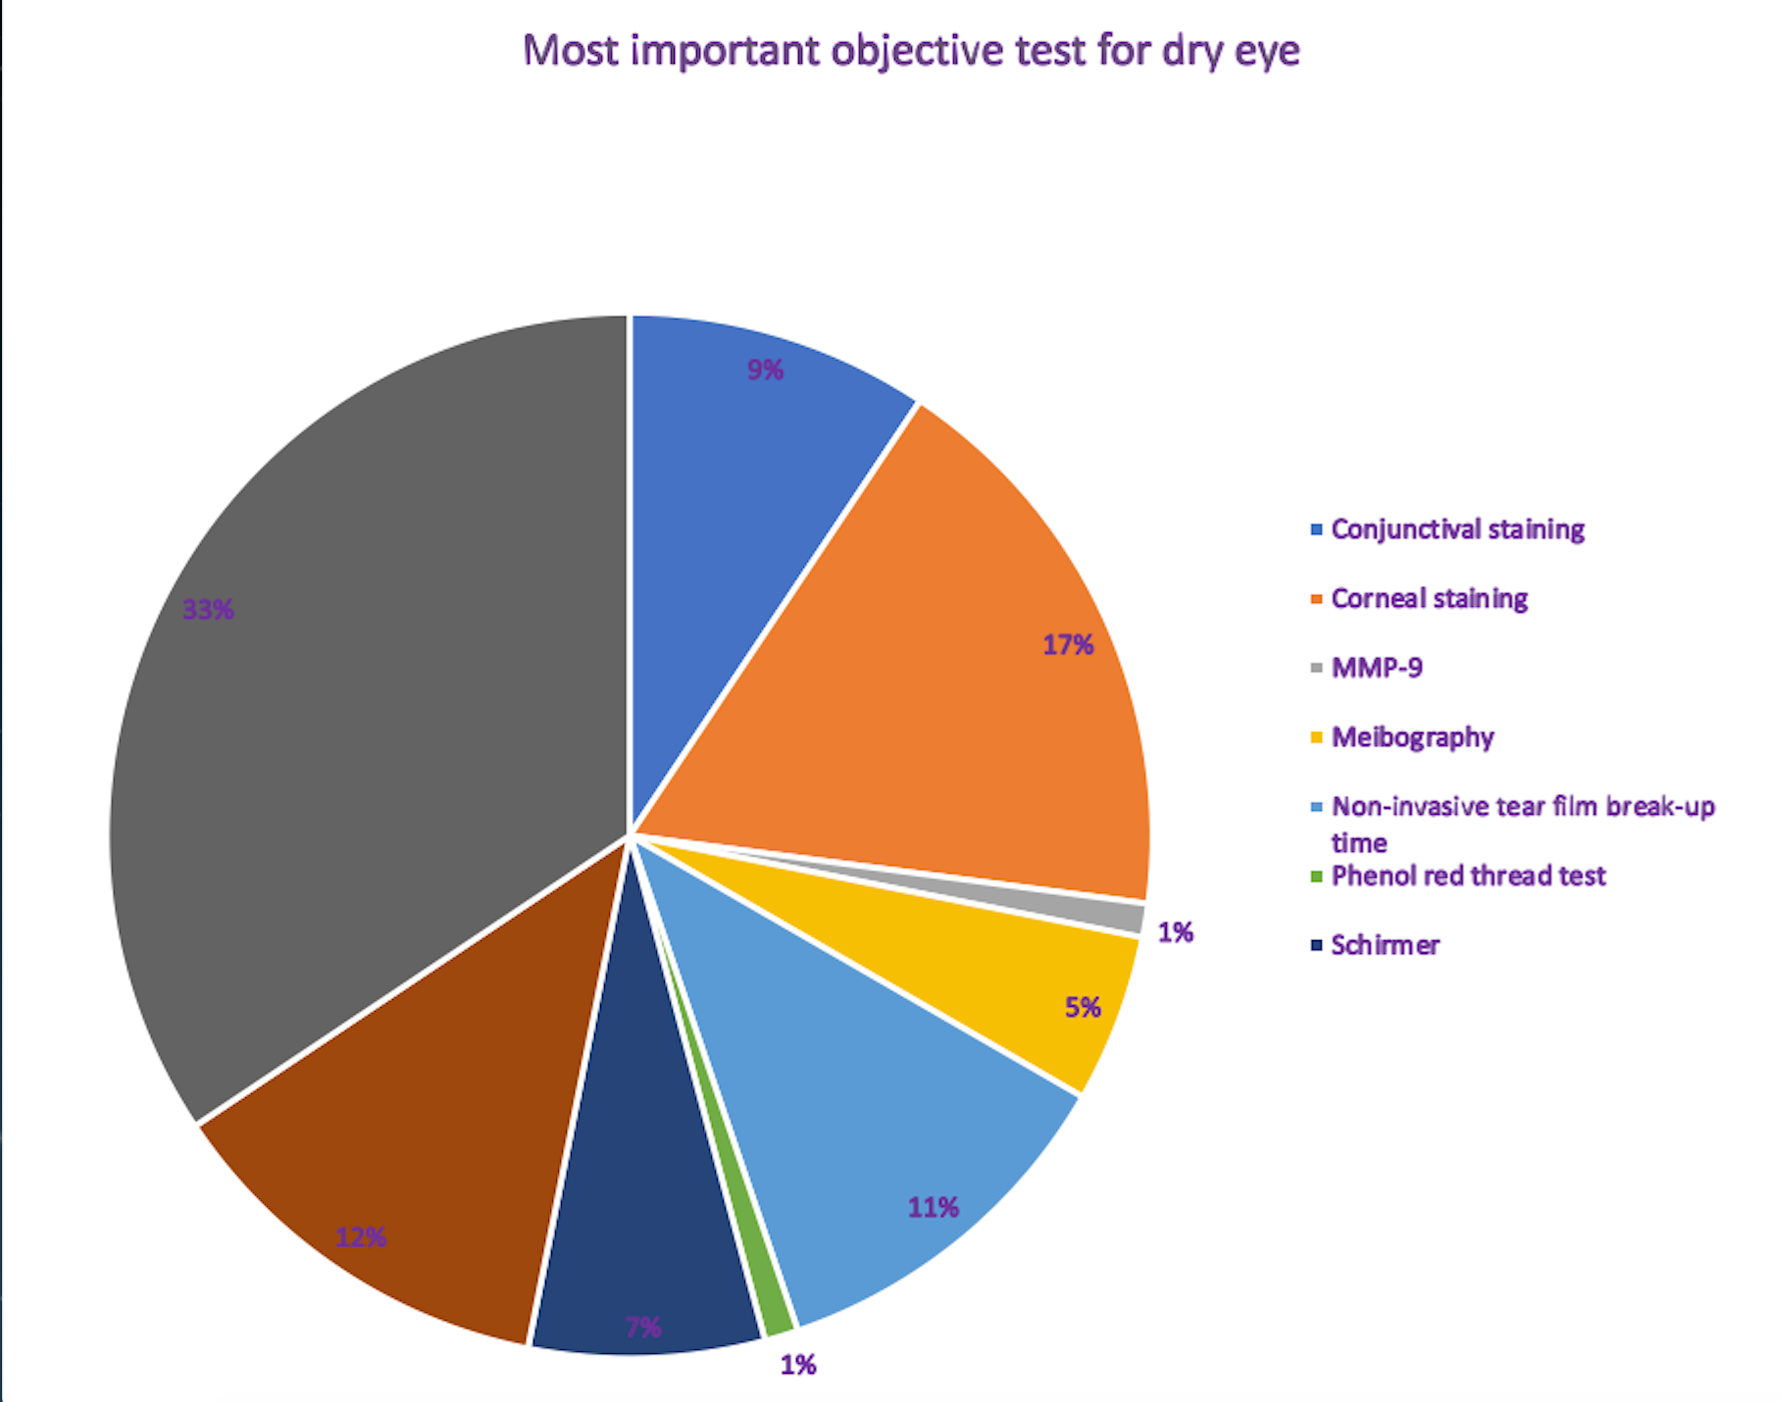 The most important objective dry eye test is TBUT with fluorescein, ODs say